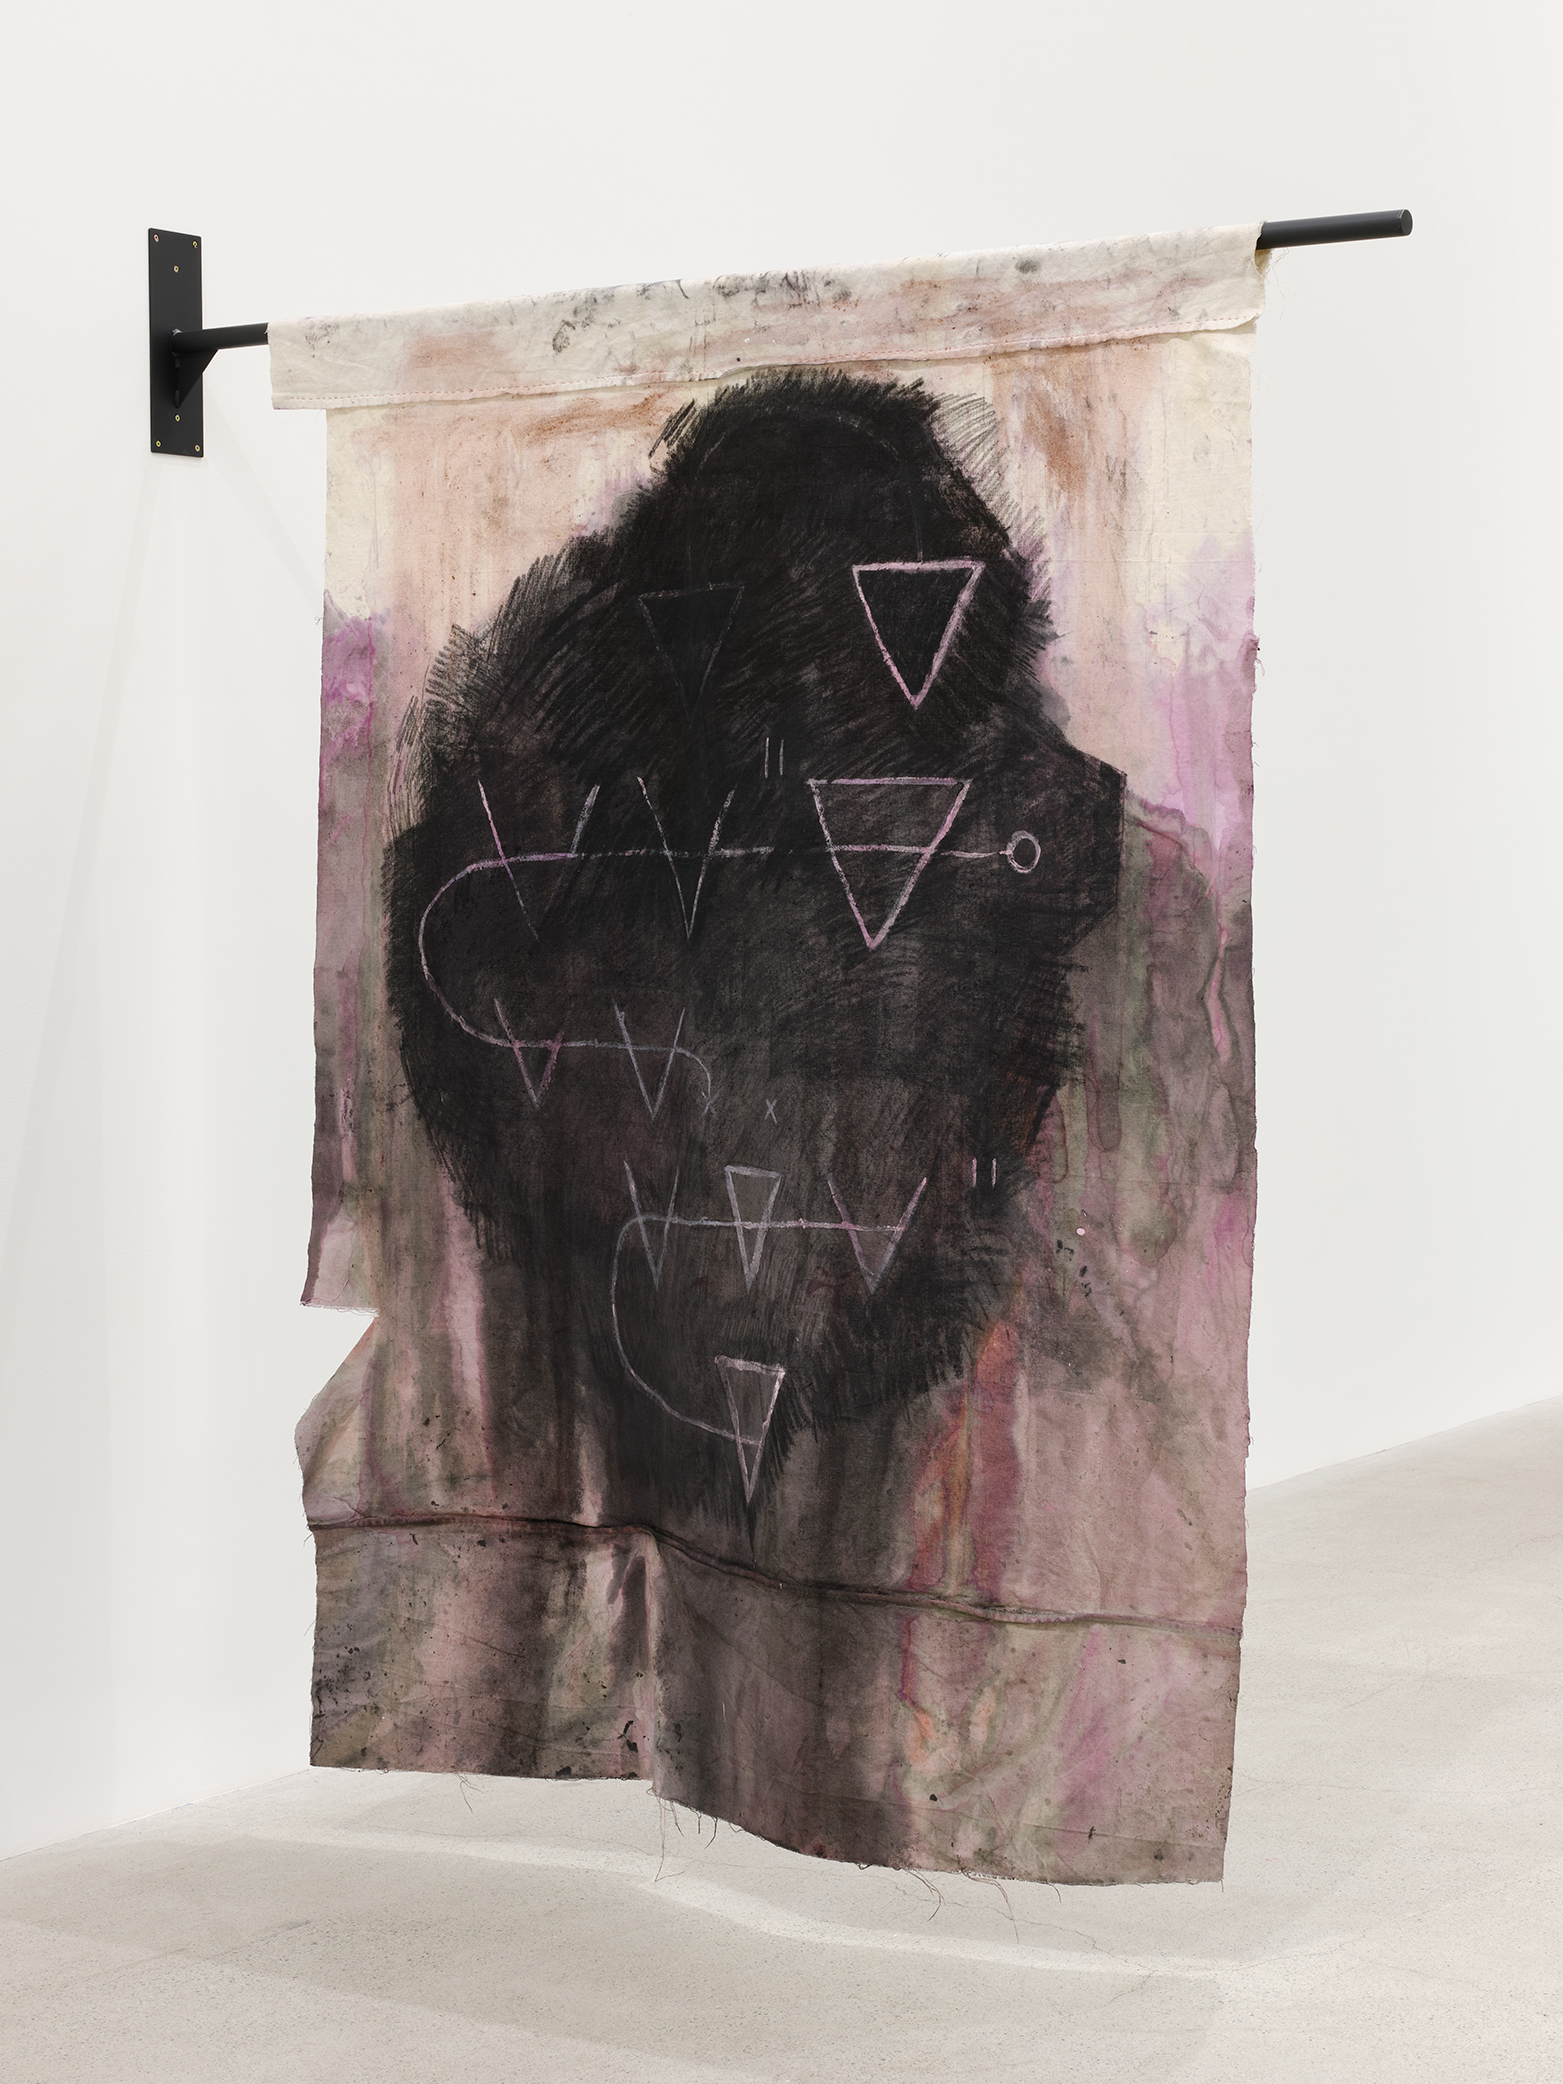 Duane Linklater, score for the back of my head, 2021, canvas, sumac, cochineal dye, charcoal, house paint, cotton thread, steel, 76 x 58 x 5 in. (193 x 147 x 13 cm) by 